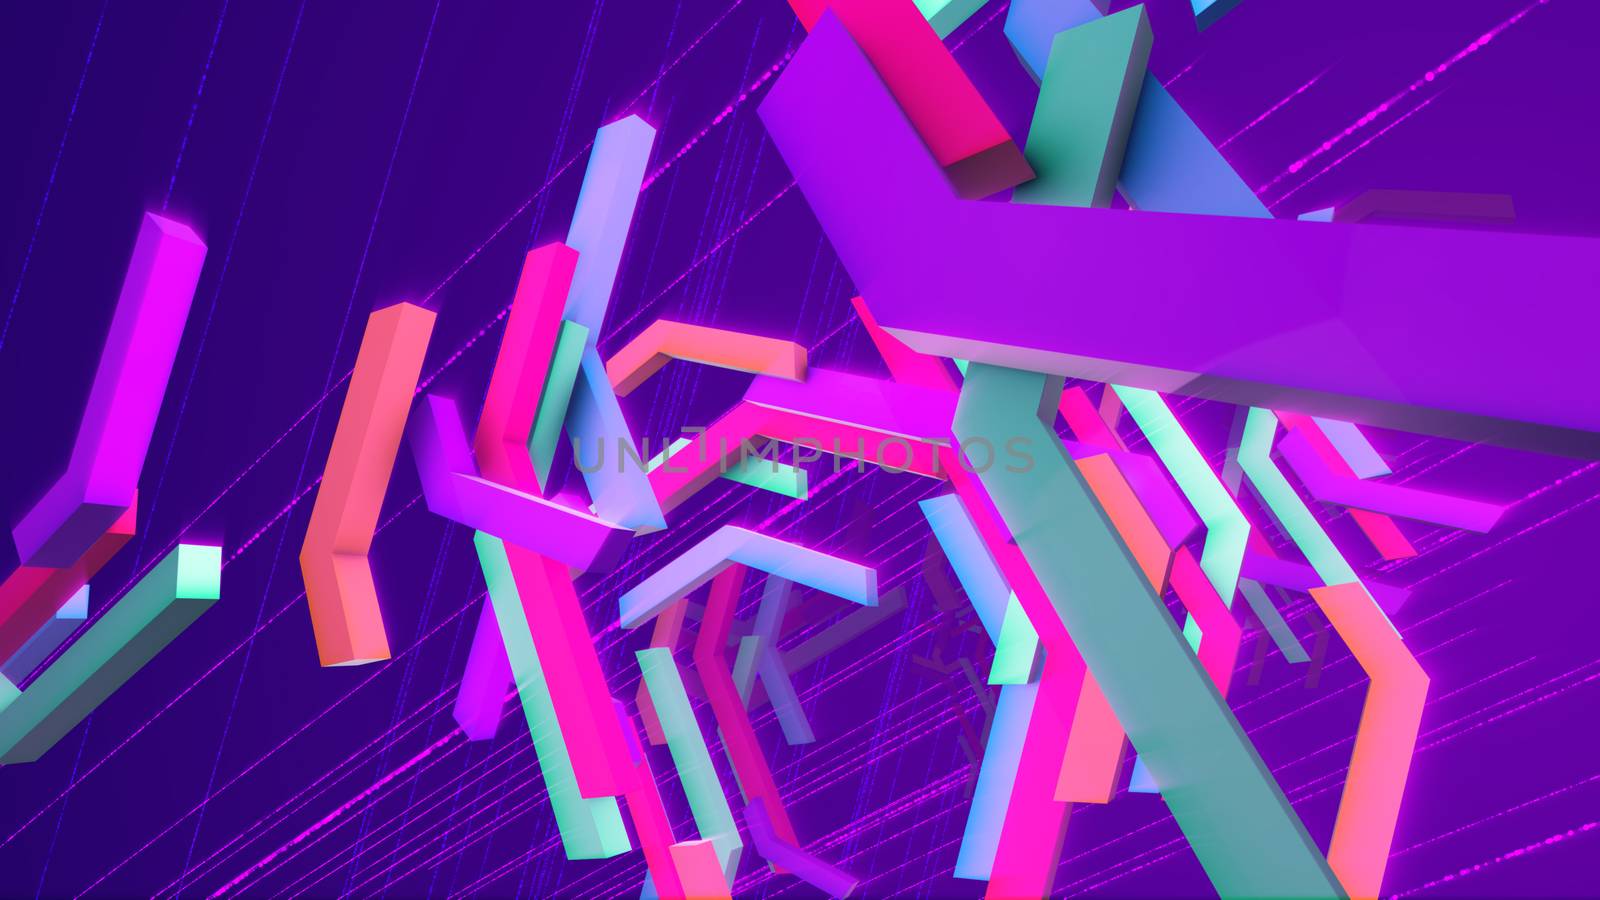 Jolly 3d illustration of soaring colorful technical bars having curvy and zigzag figures in the dark violet background with a hexagonal network. They look optimistic, celbratory and funny.